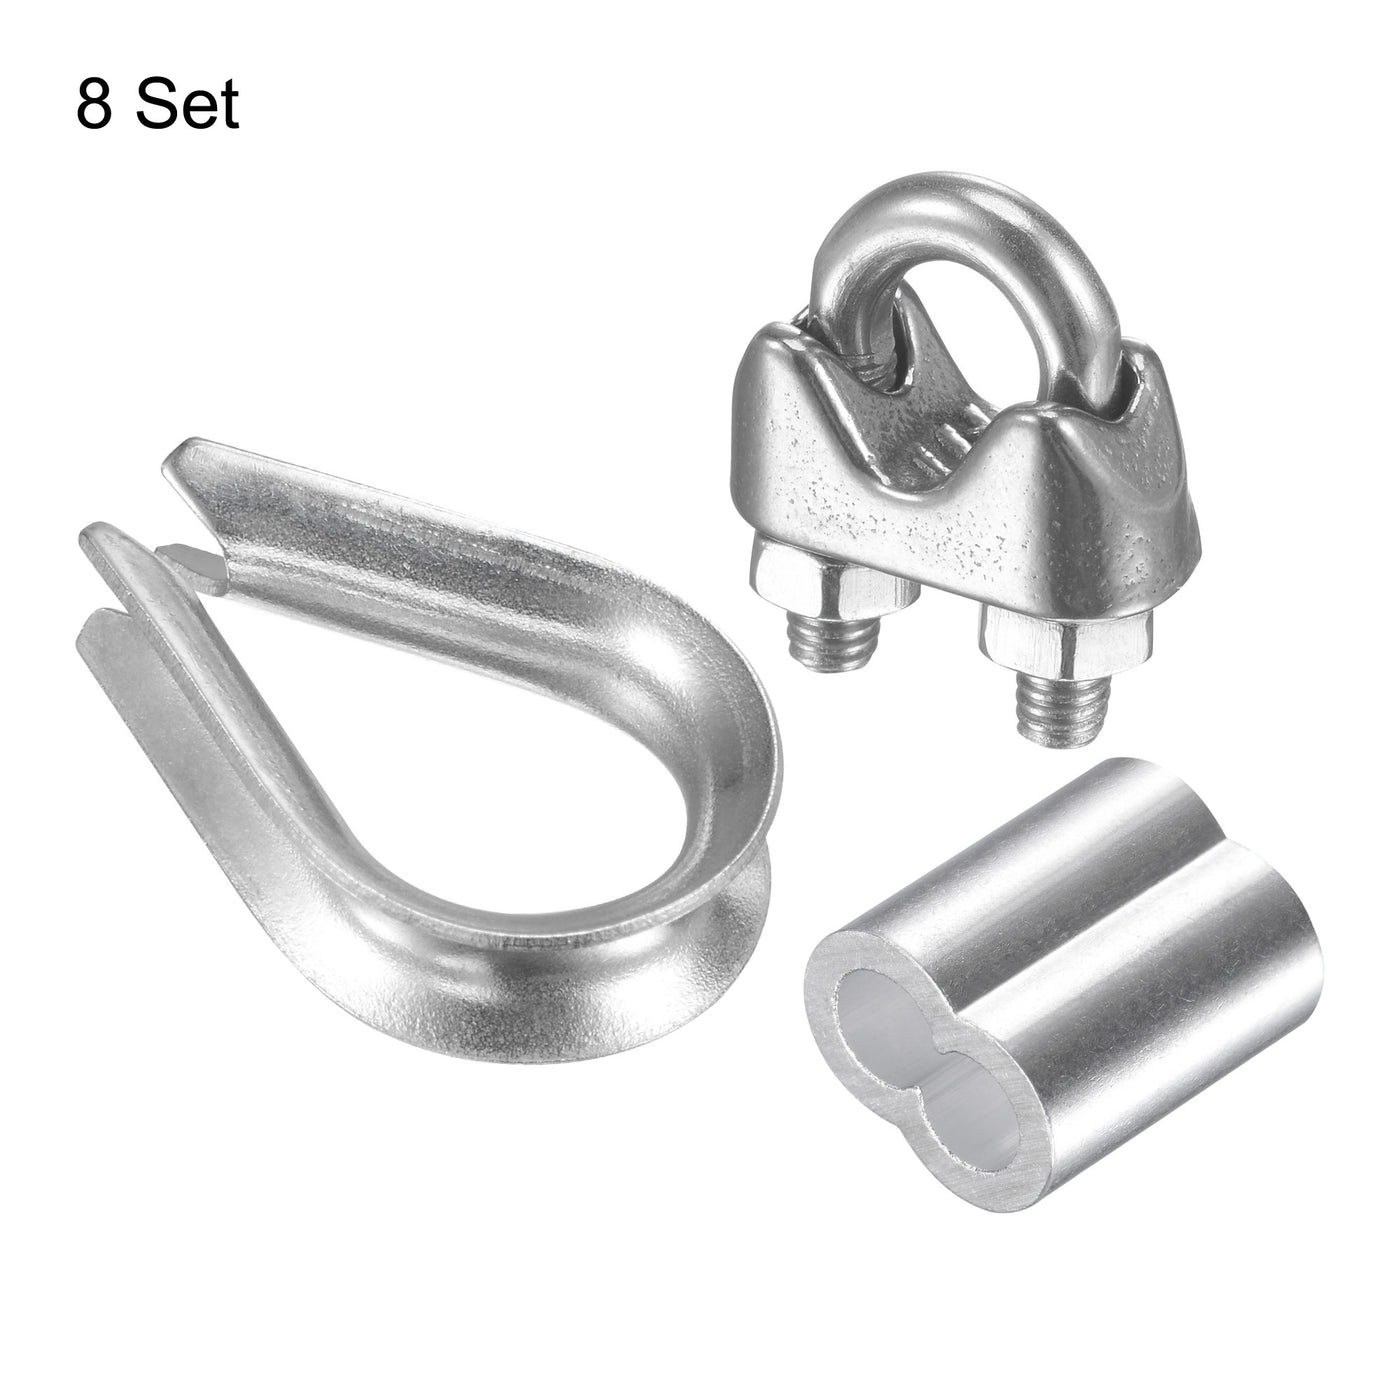 uxcell Uxcell Wire Rope Cable Clip Kit for M4, Included 304 Stainless Steel Rope Clamp, Thimble Rigging, Aluminum Crimping Loop Sleeve 8 Set